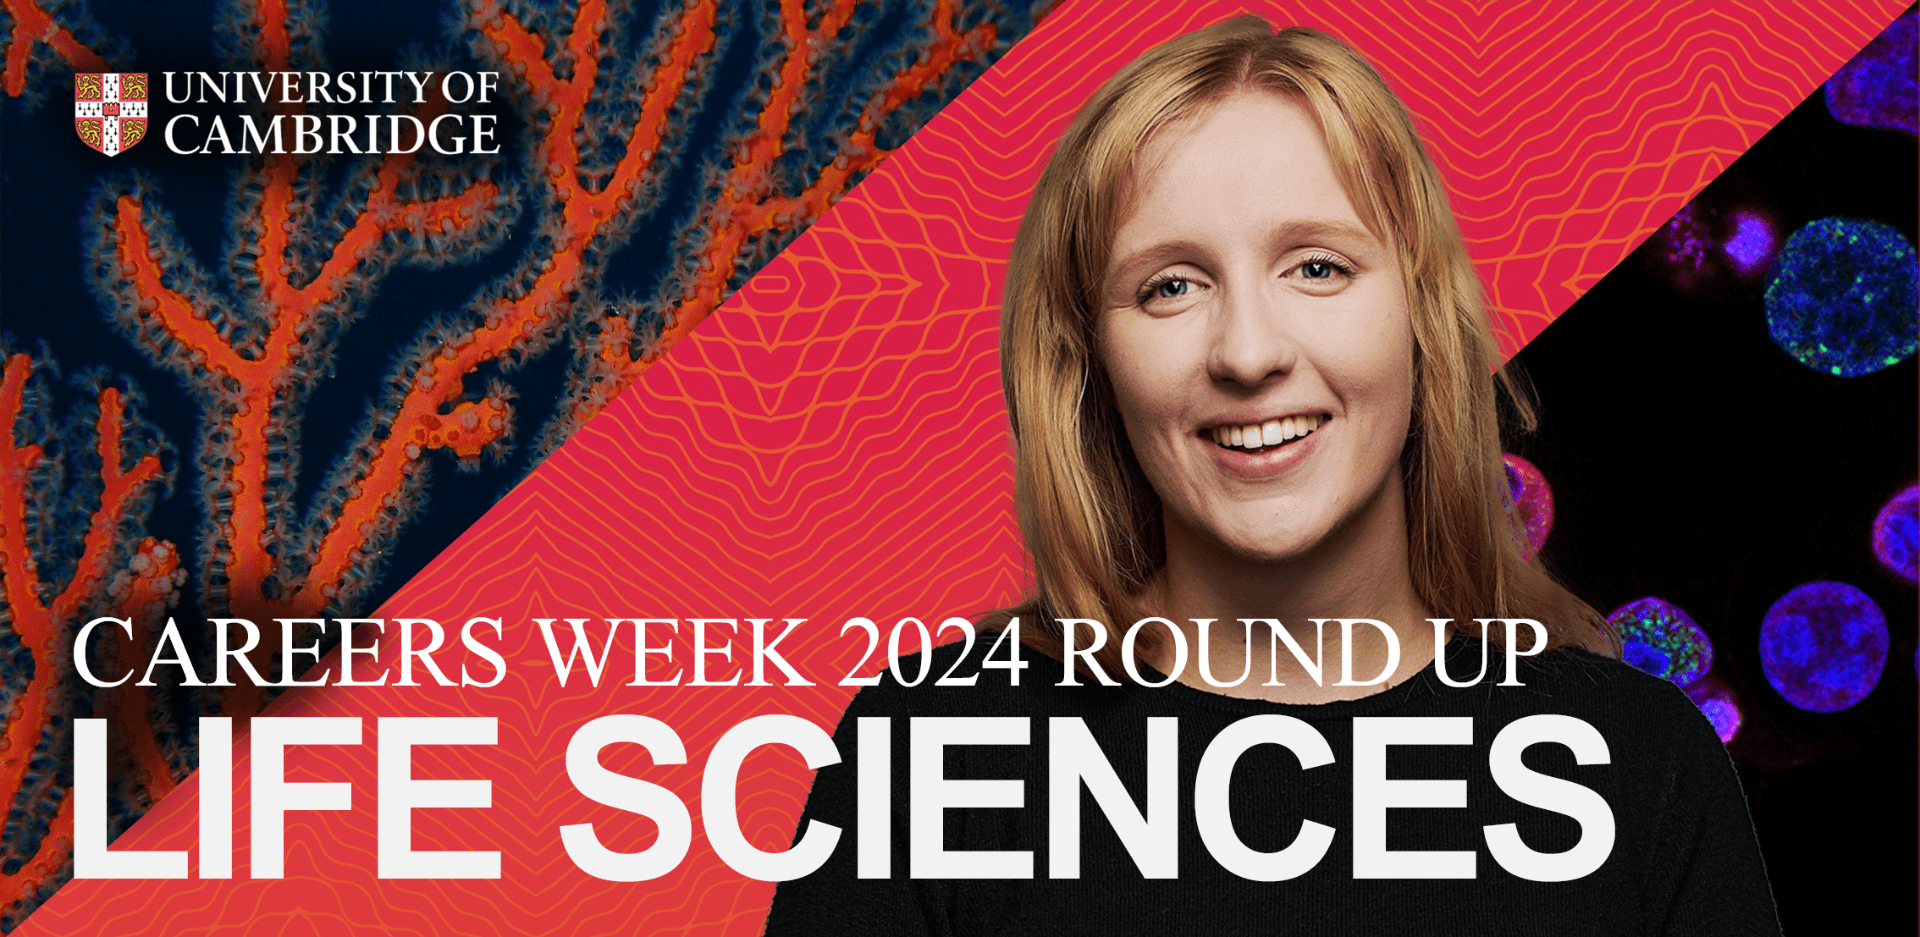 A banner written 'Careers Week 2024 Round Up Life Sciences'